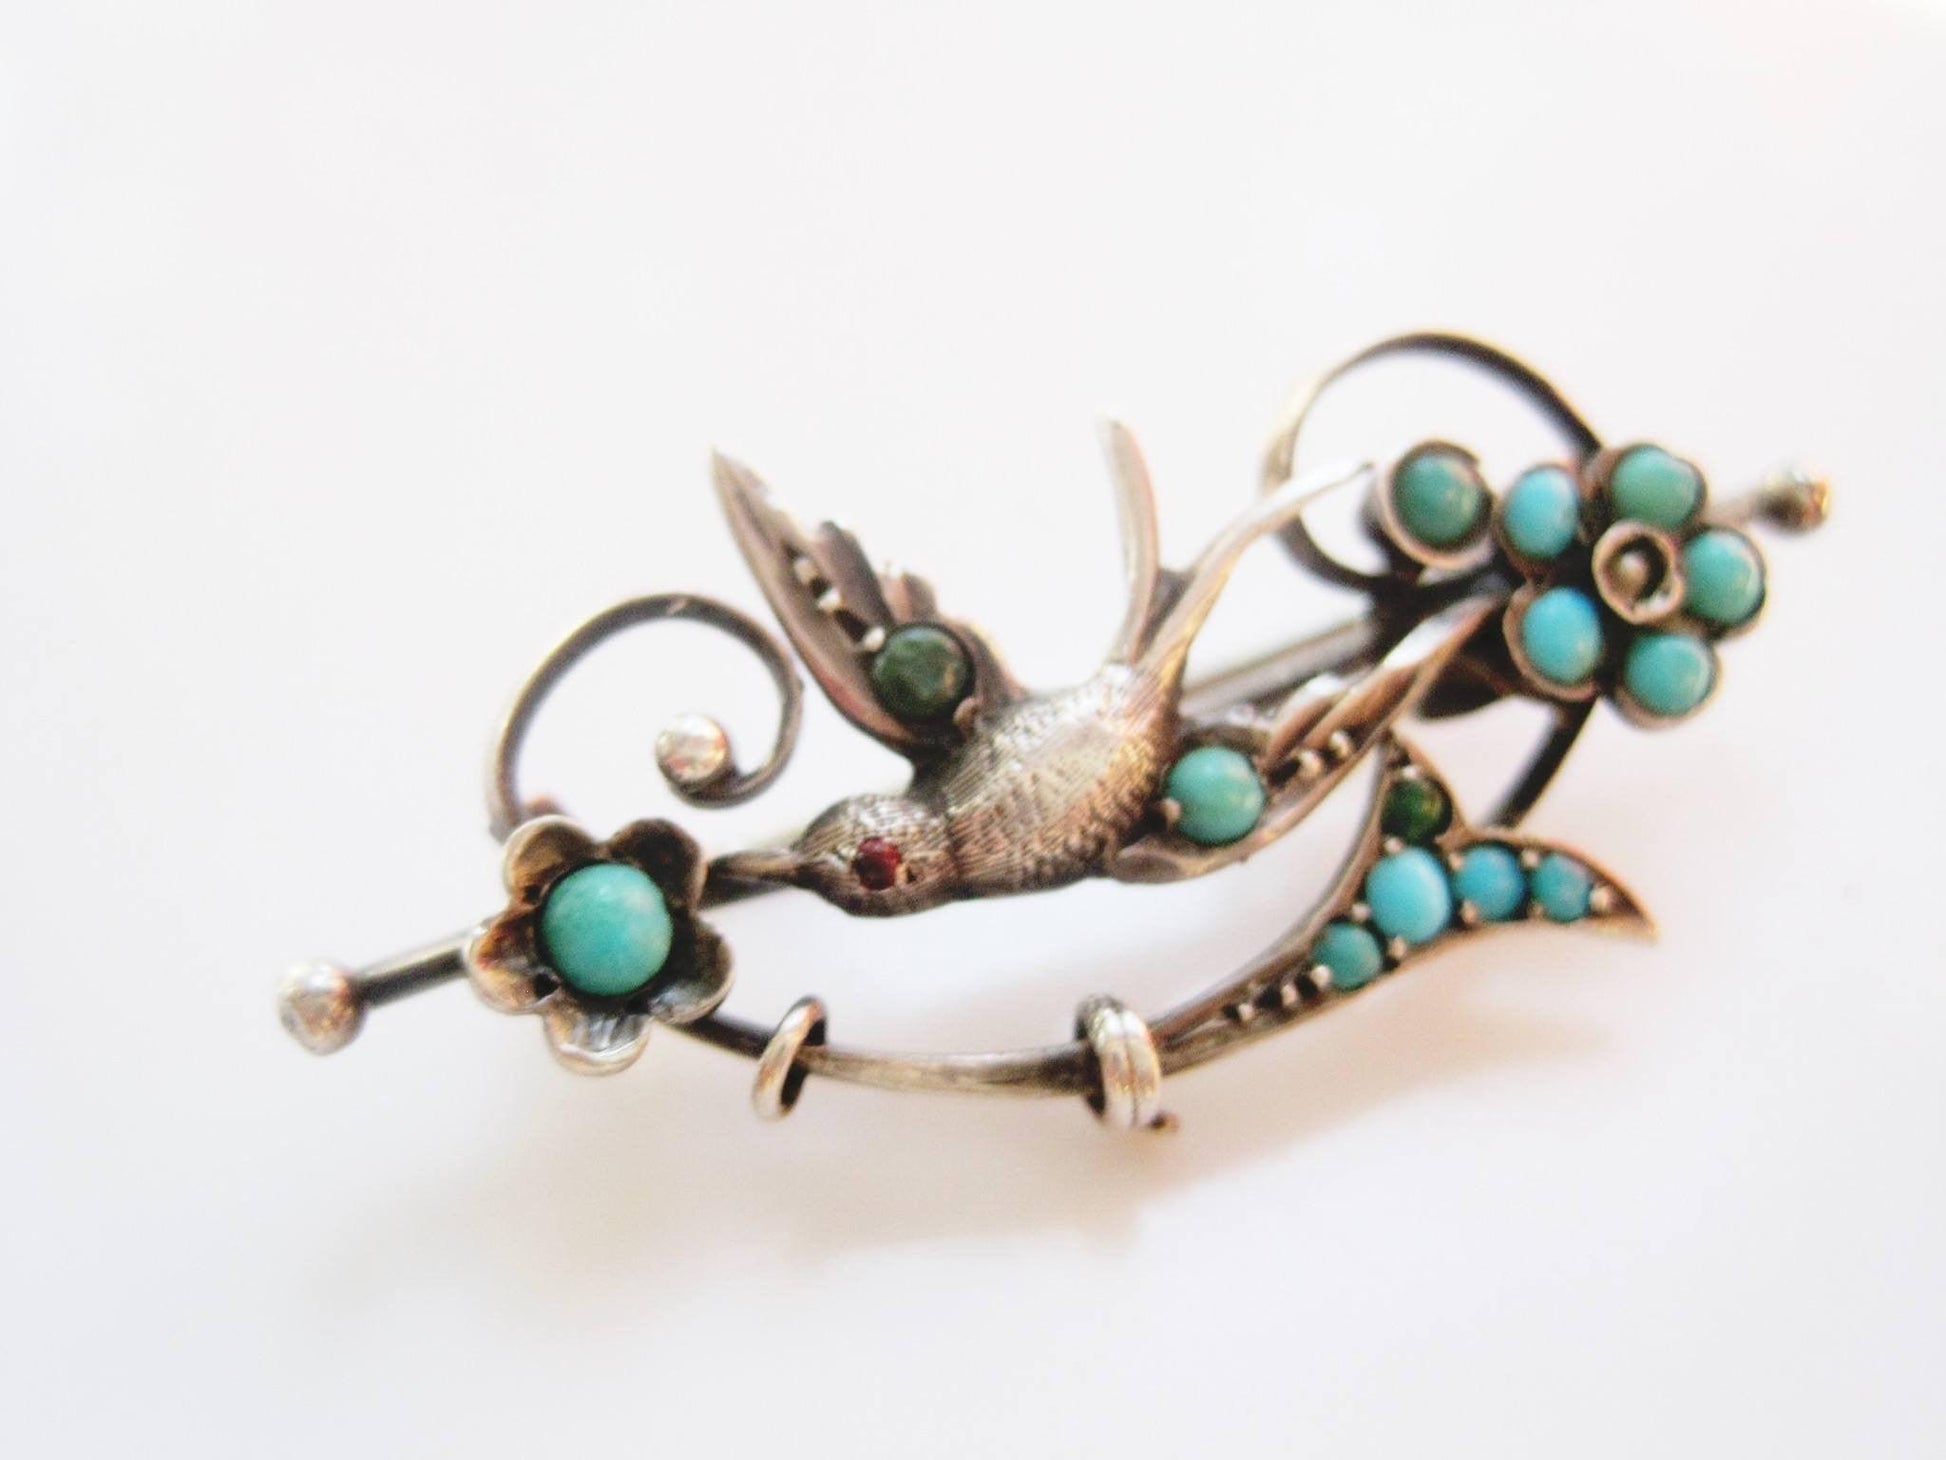 Antique Victorian Silver and Turquoise Swallow Bird Brooch or Pin - Anteeka